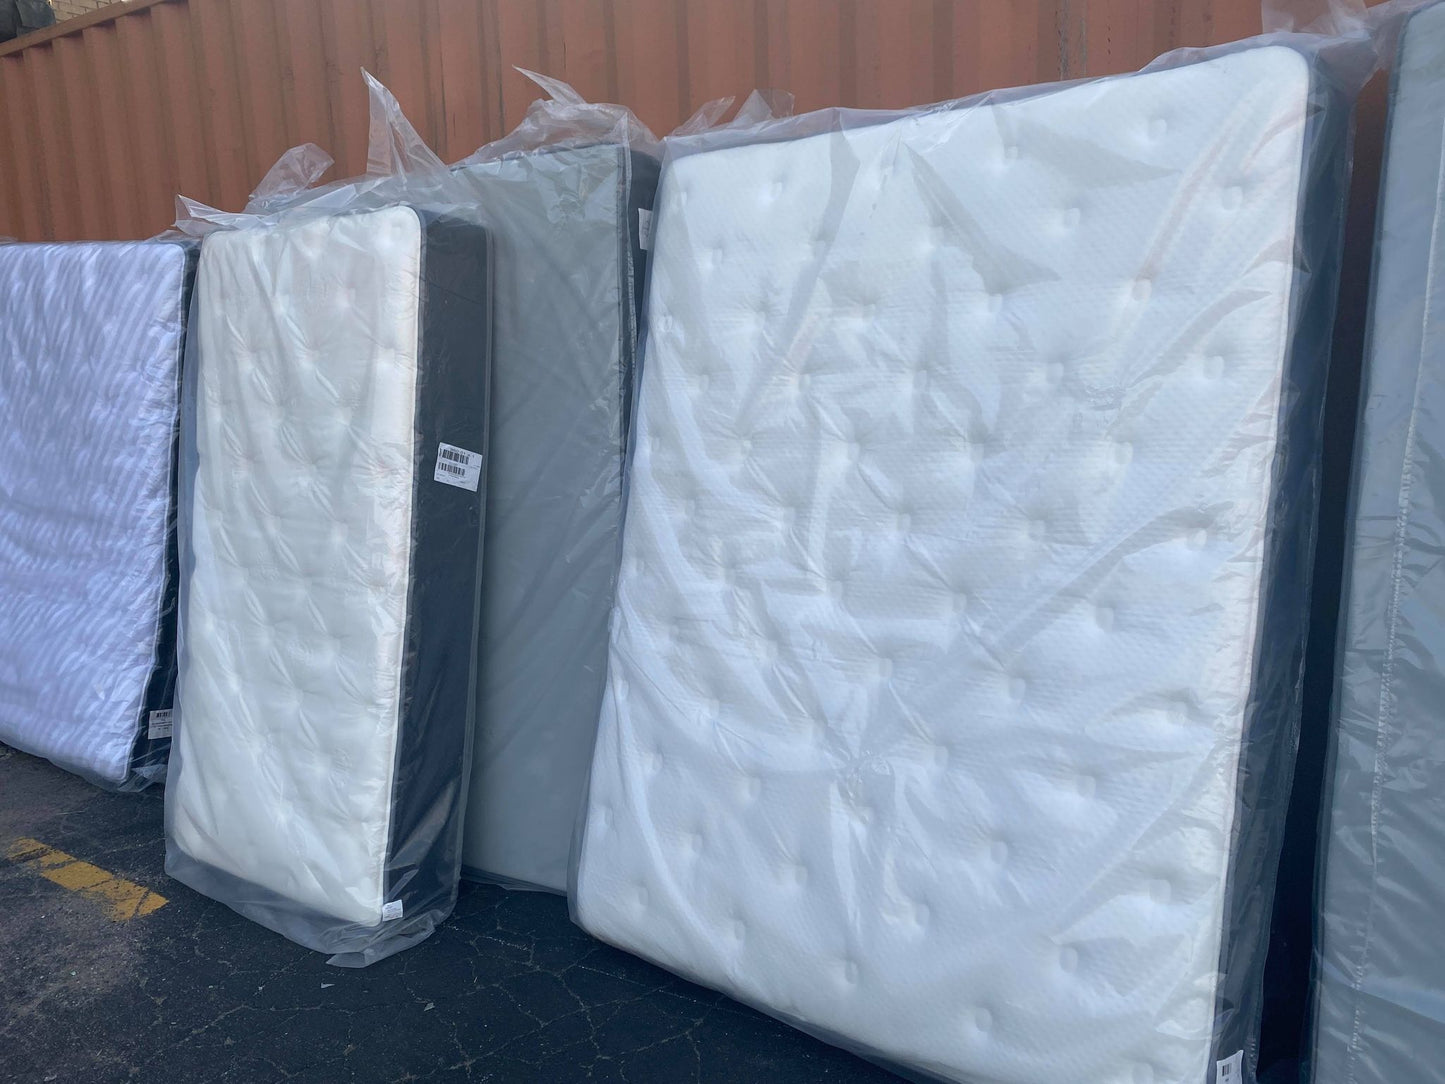 WEEKLY or MONTHLY. Silver Bamboo Full Mattress